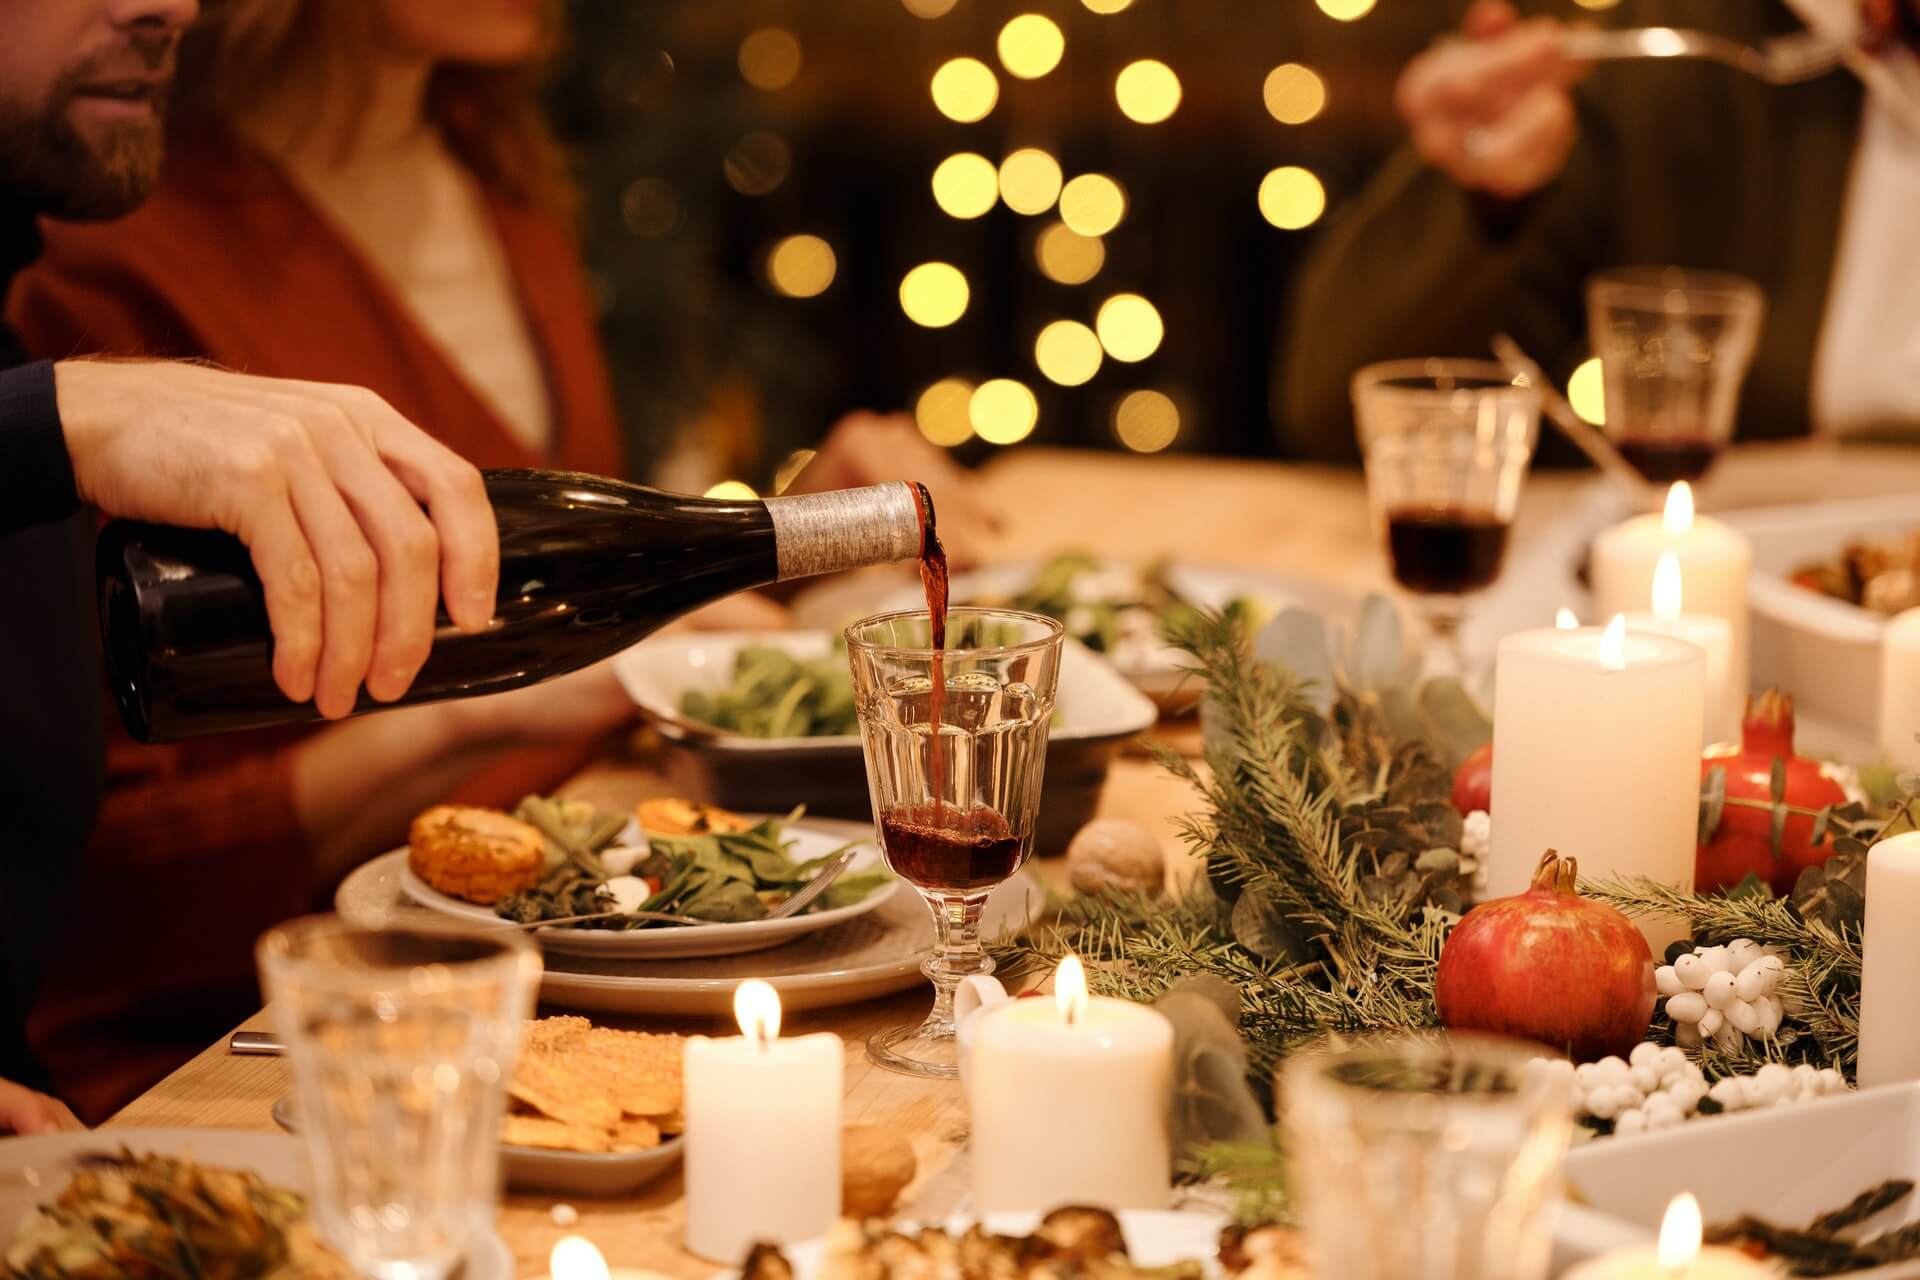 A dinner party with wine